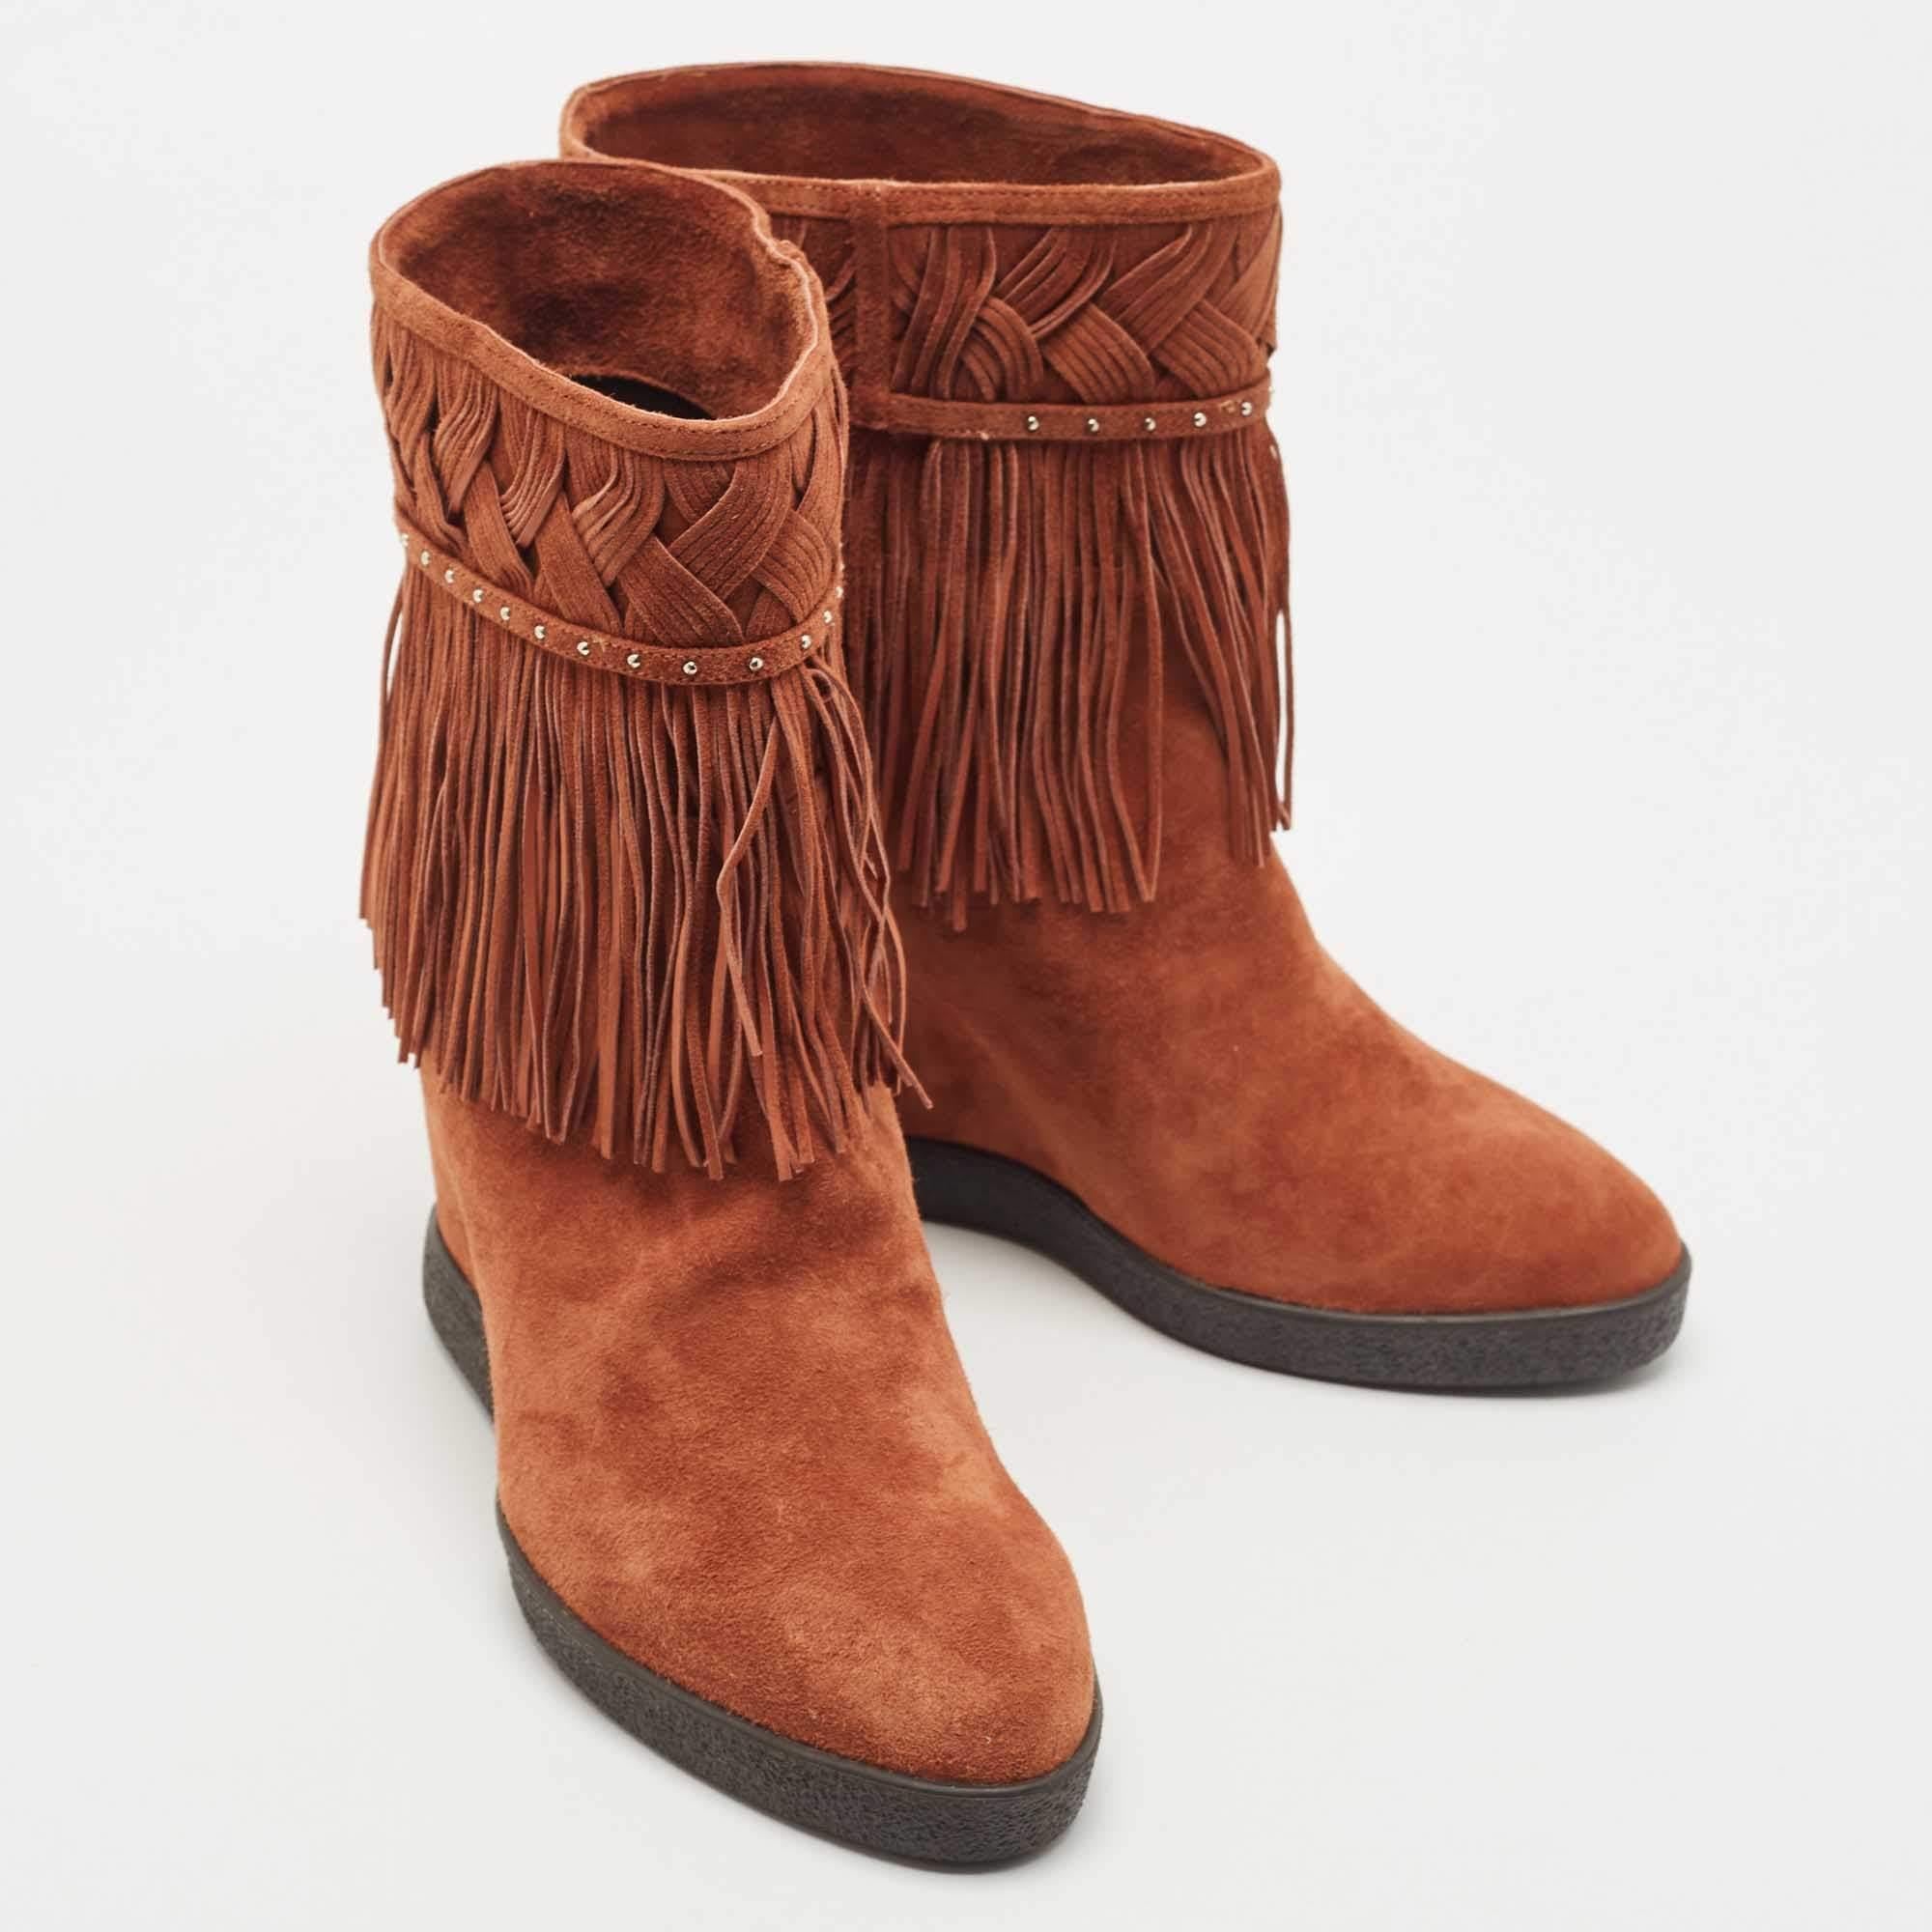 Le Silla Brown Suede Fringe Ankle Length Boots Size 38.5 For Sale 1